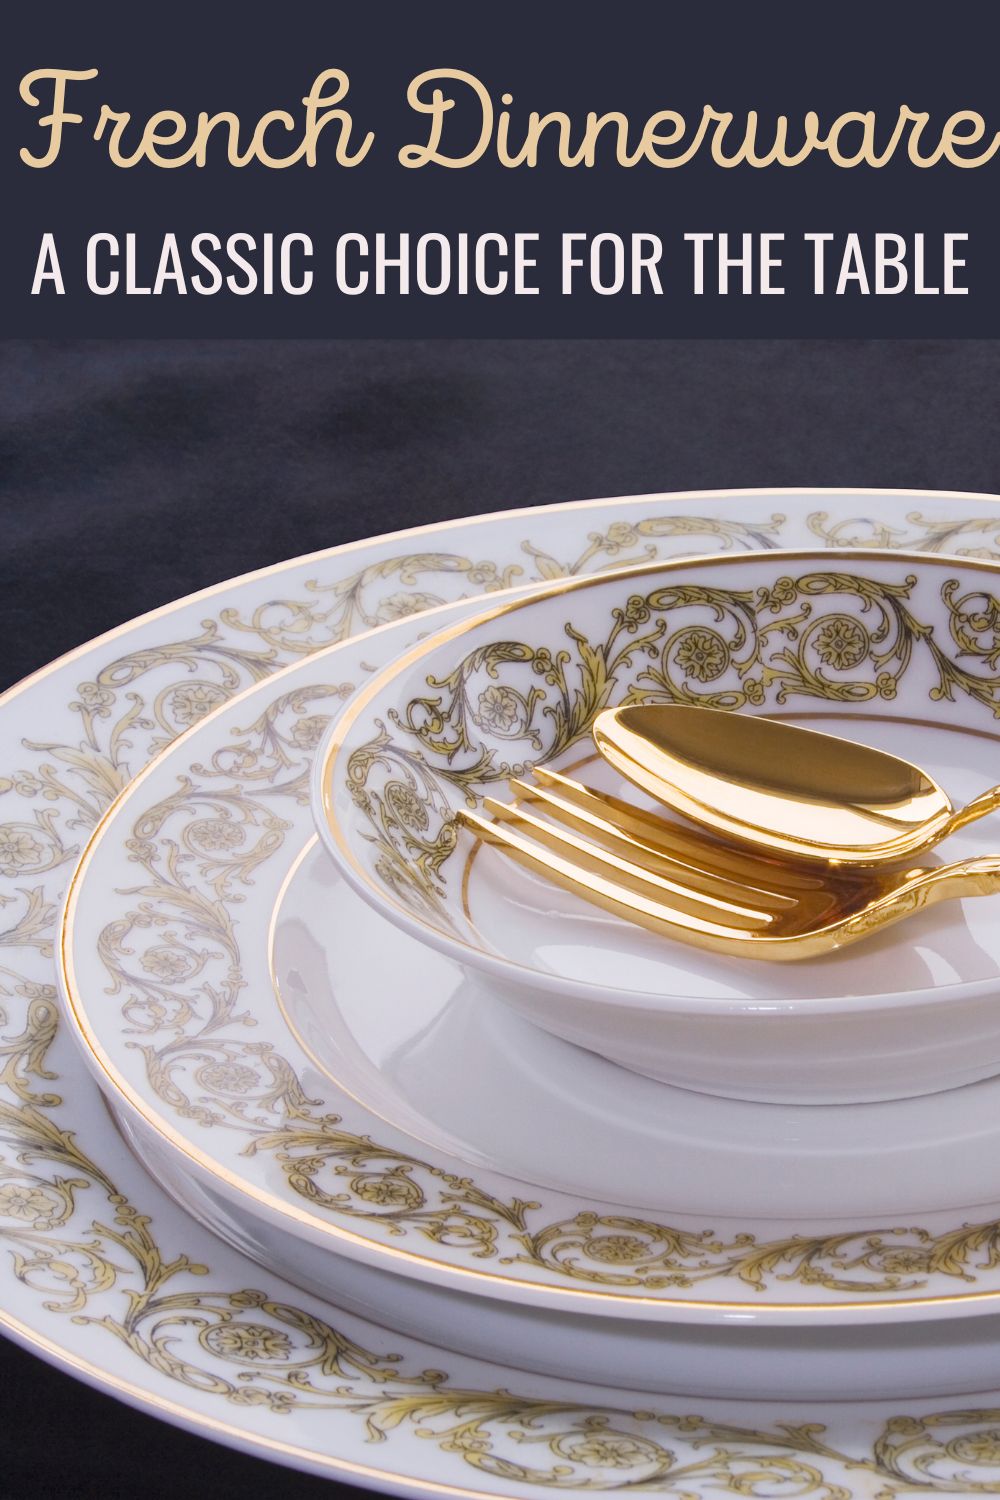 French dinnerware - a classic choice for the table.